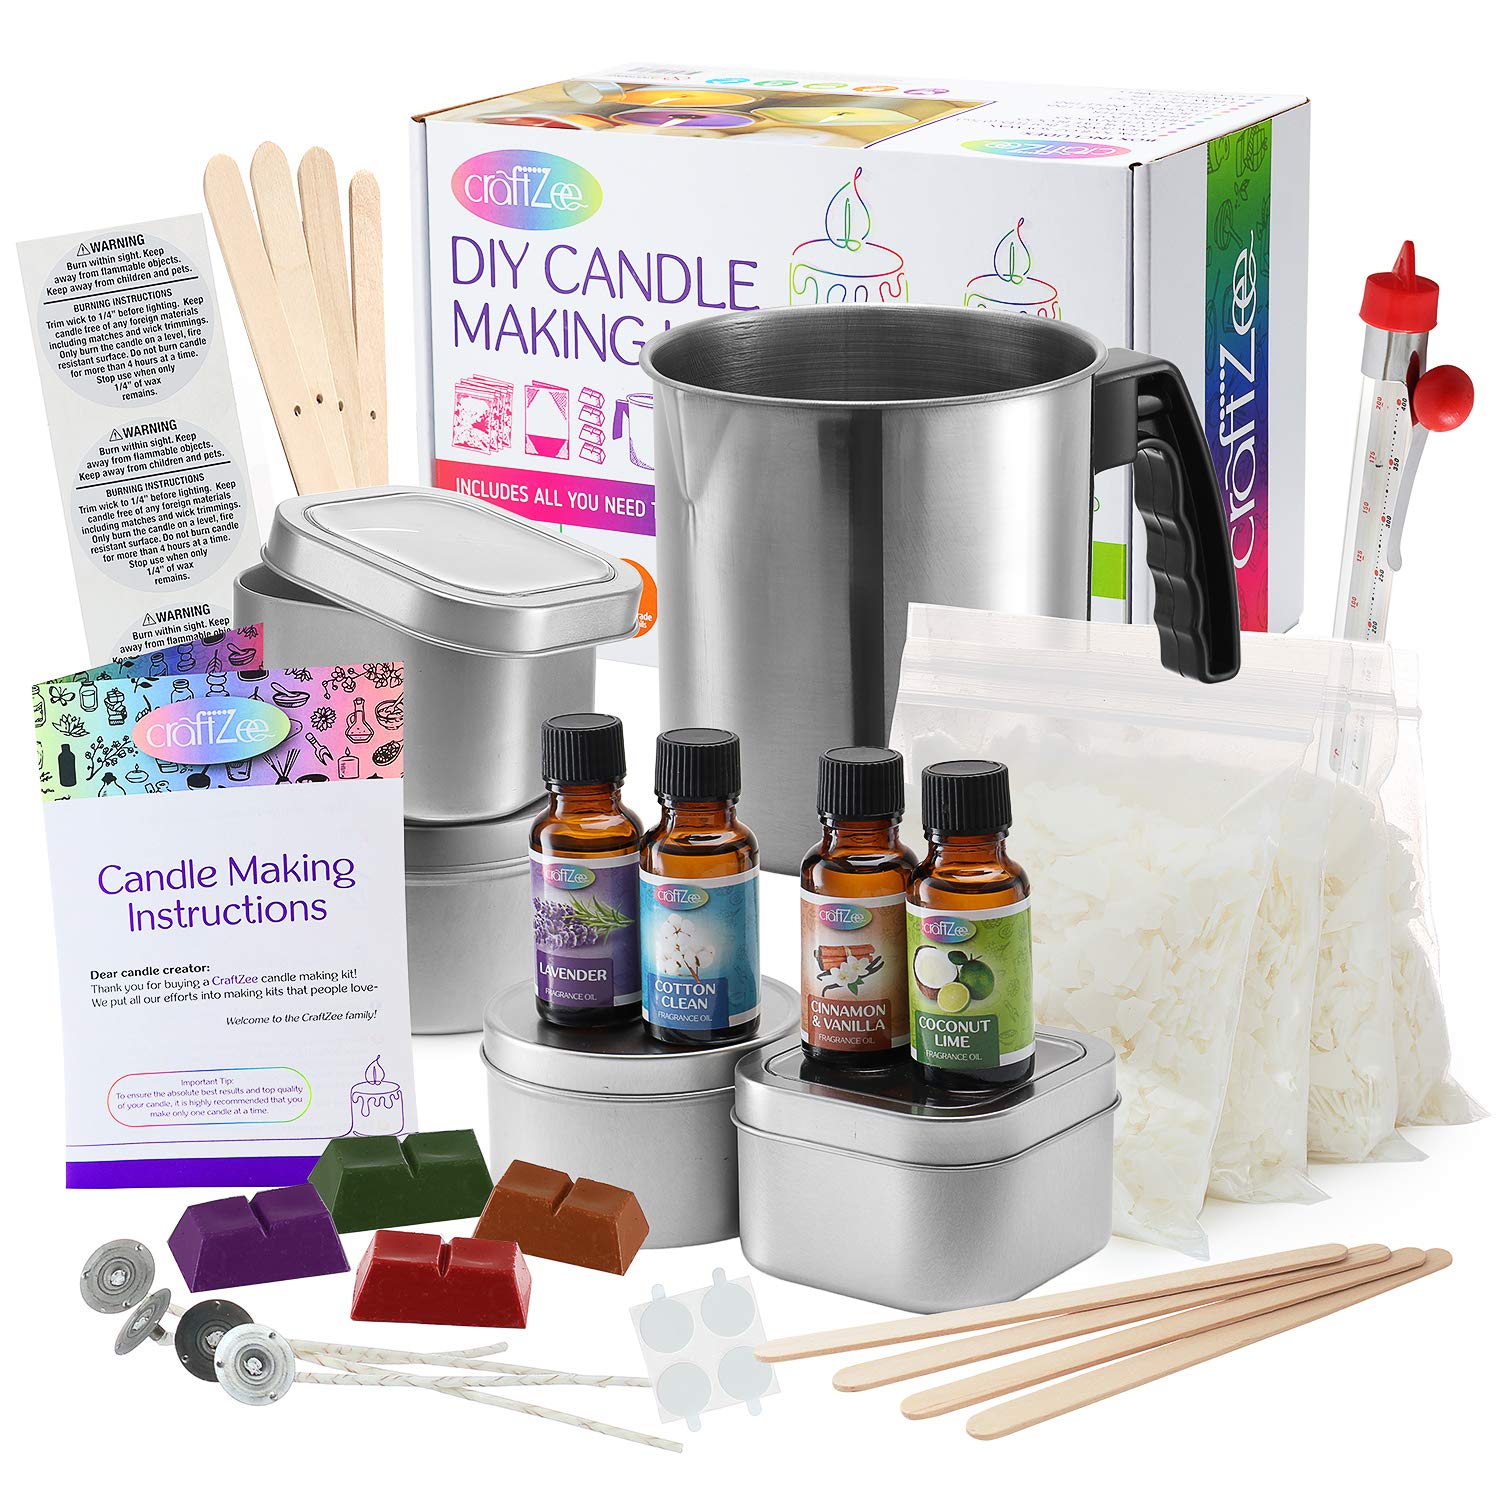 Get Creative With Candle Making: A Look At Candle Making Kits